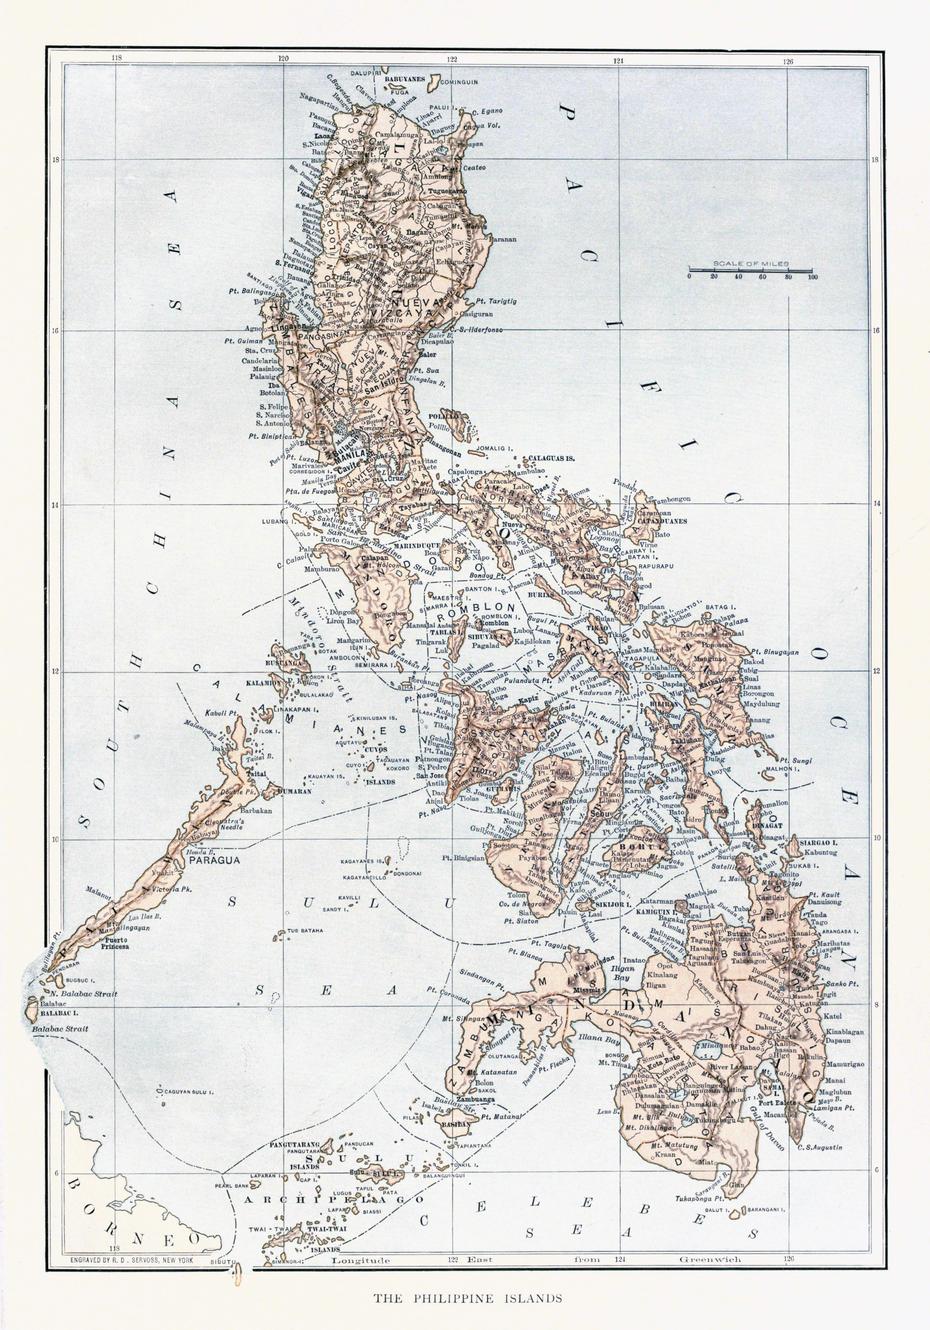 Maps Of Philippines | Detailed Map Of Philippines In English | Tourist …, Enrile, Philippines, Juan Ponce Enrile Jr, Enrile Memes